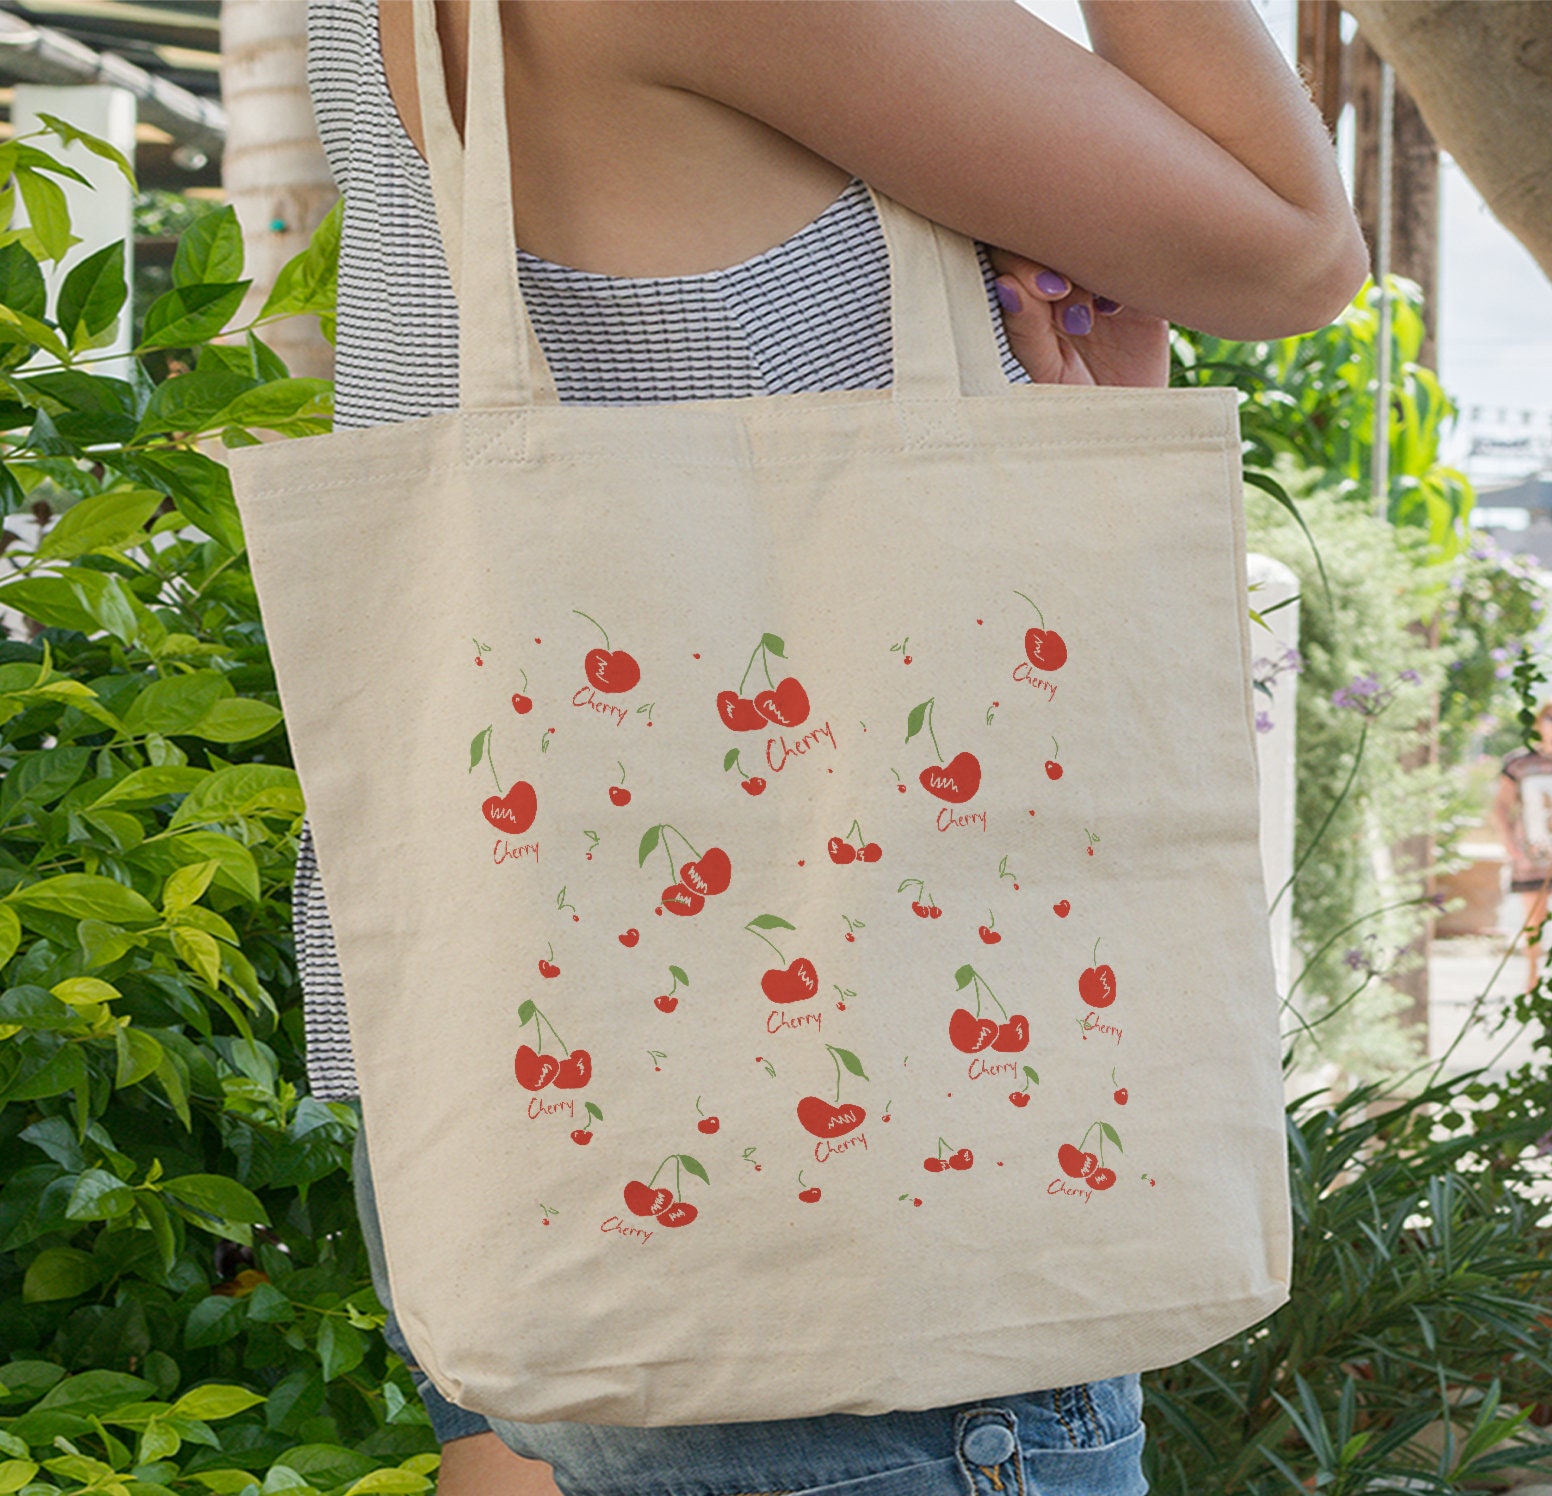 Cherry Tote Bag Graphic Canvas Tote Bag Fruit Tote Cute - Etsy